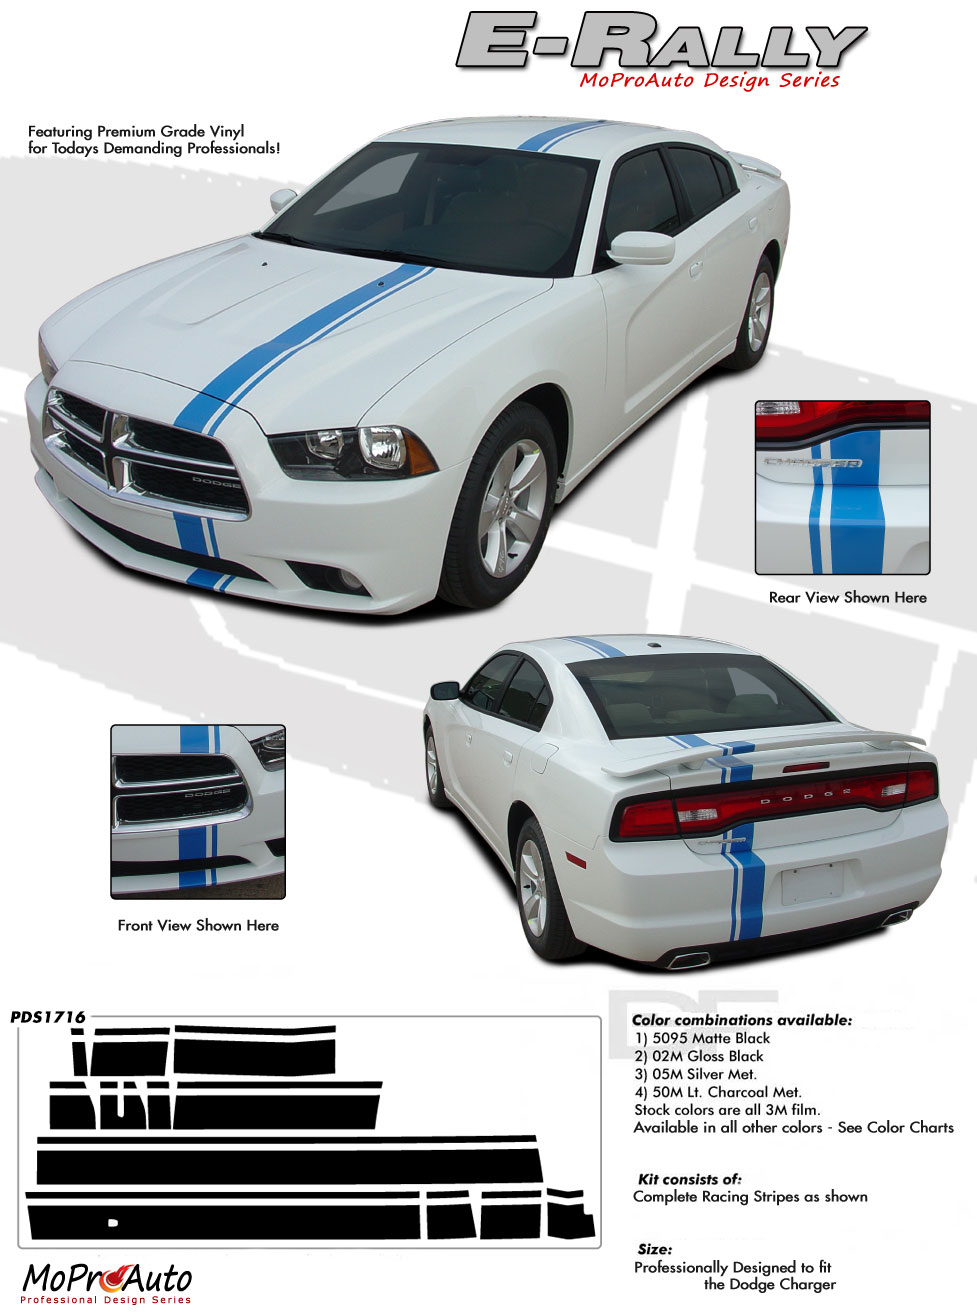 Dodge Charger E RALLY STRIPE Vinyl Graphics, Stripes and Decals Set